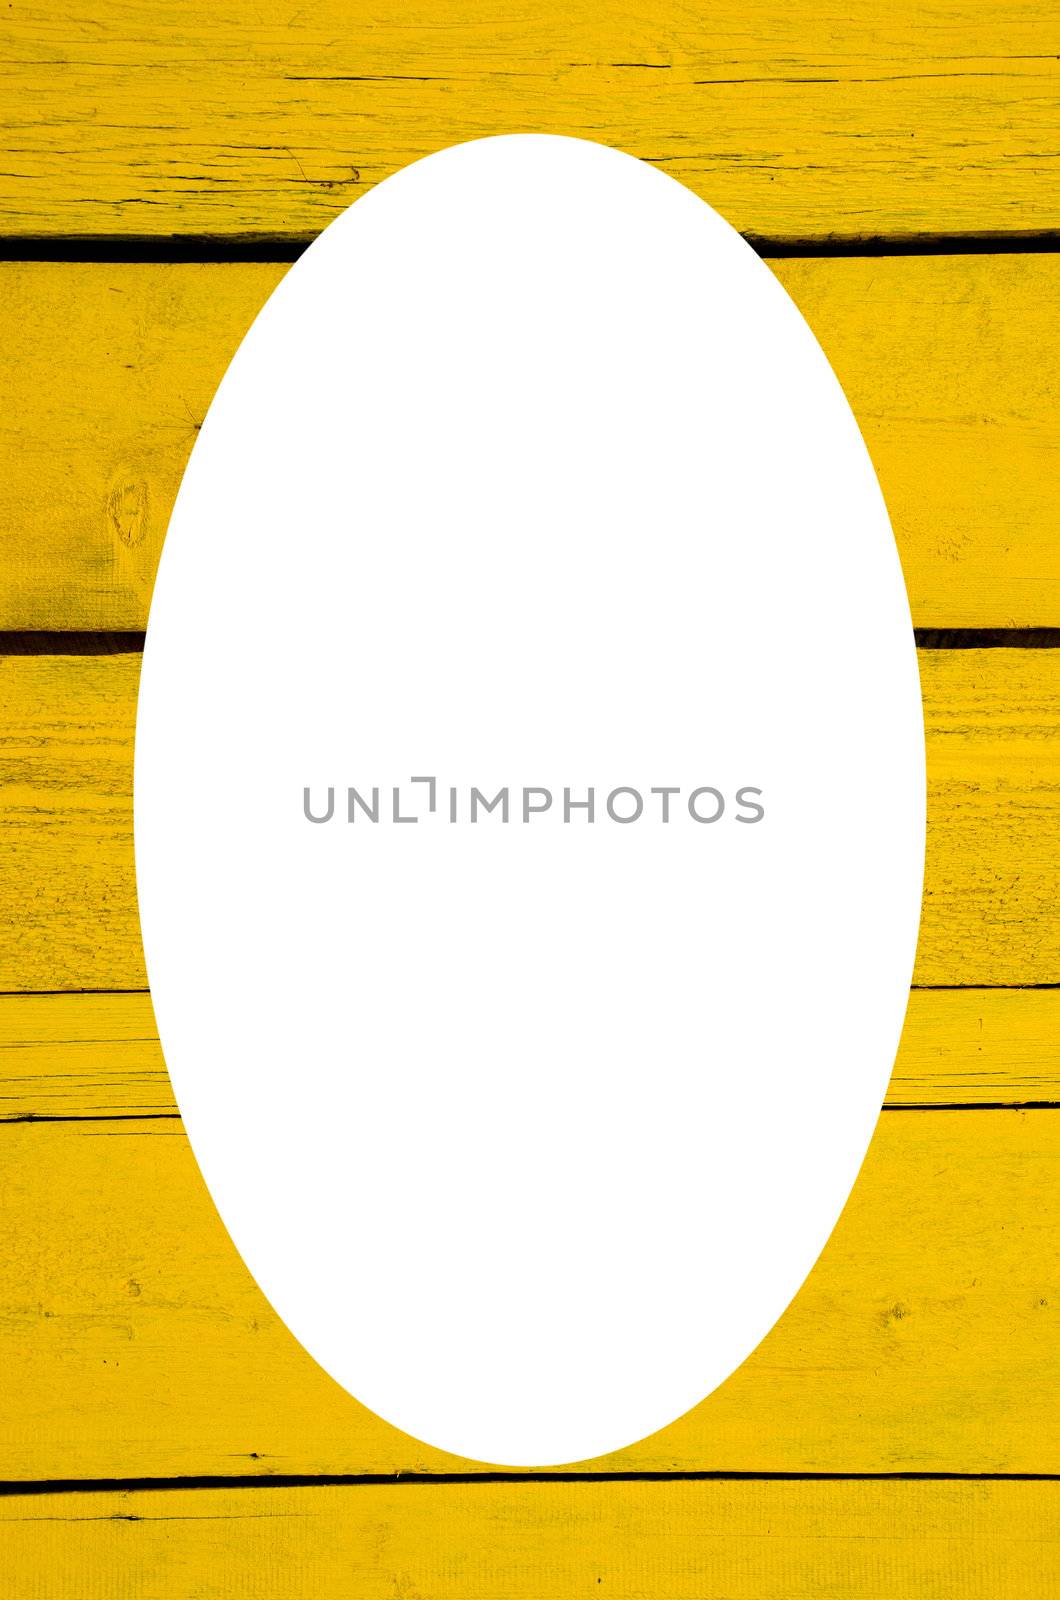 Isolated oval place for text photograph image on wall made of wooden yellow planks. Interesting background.